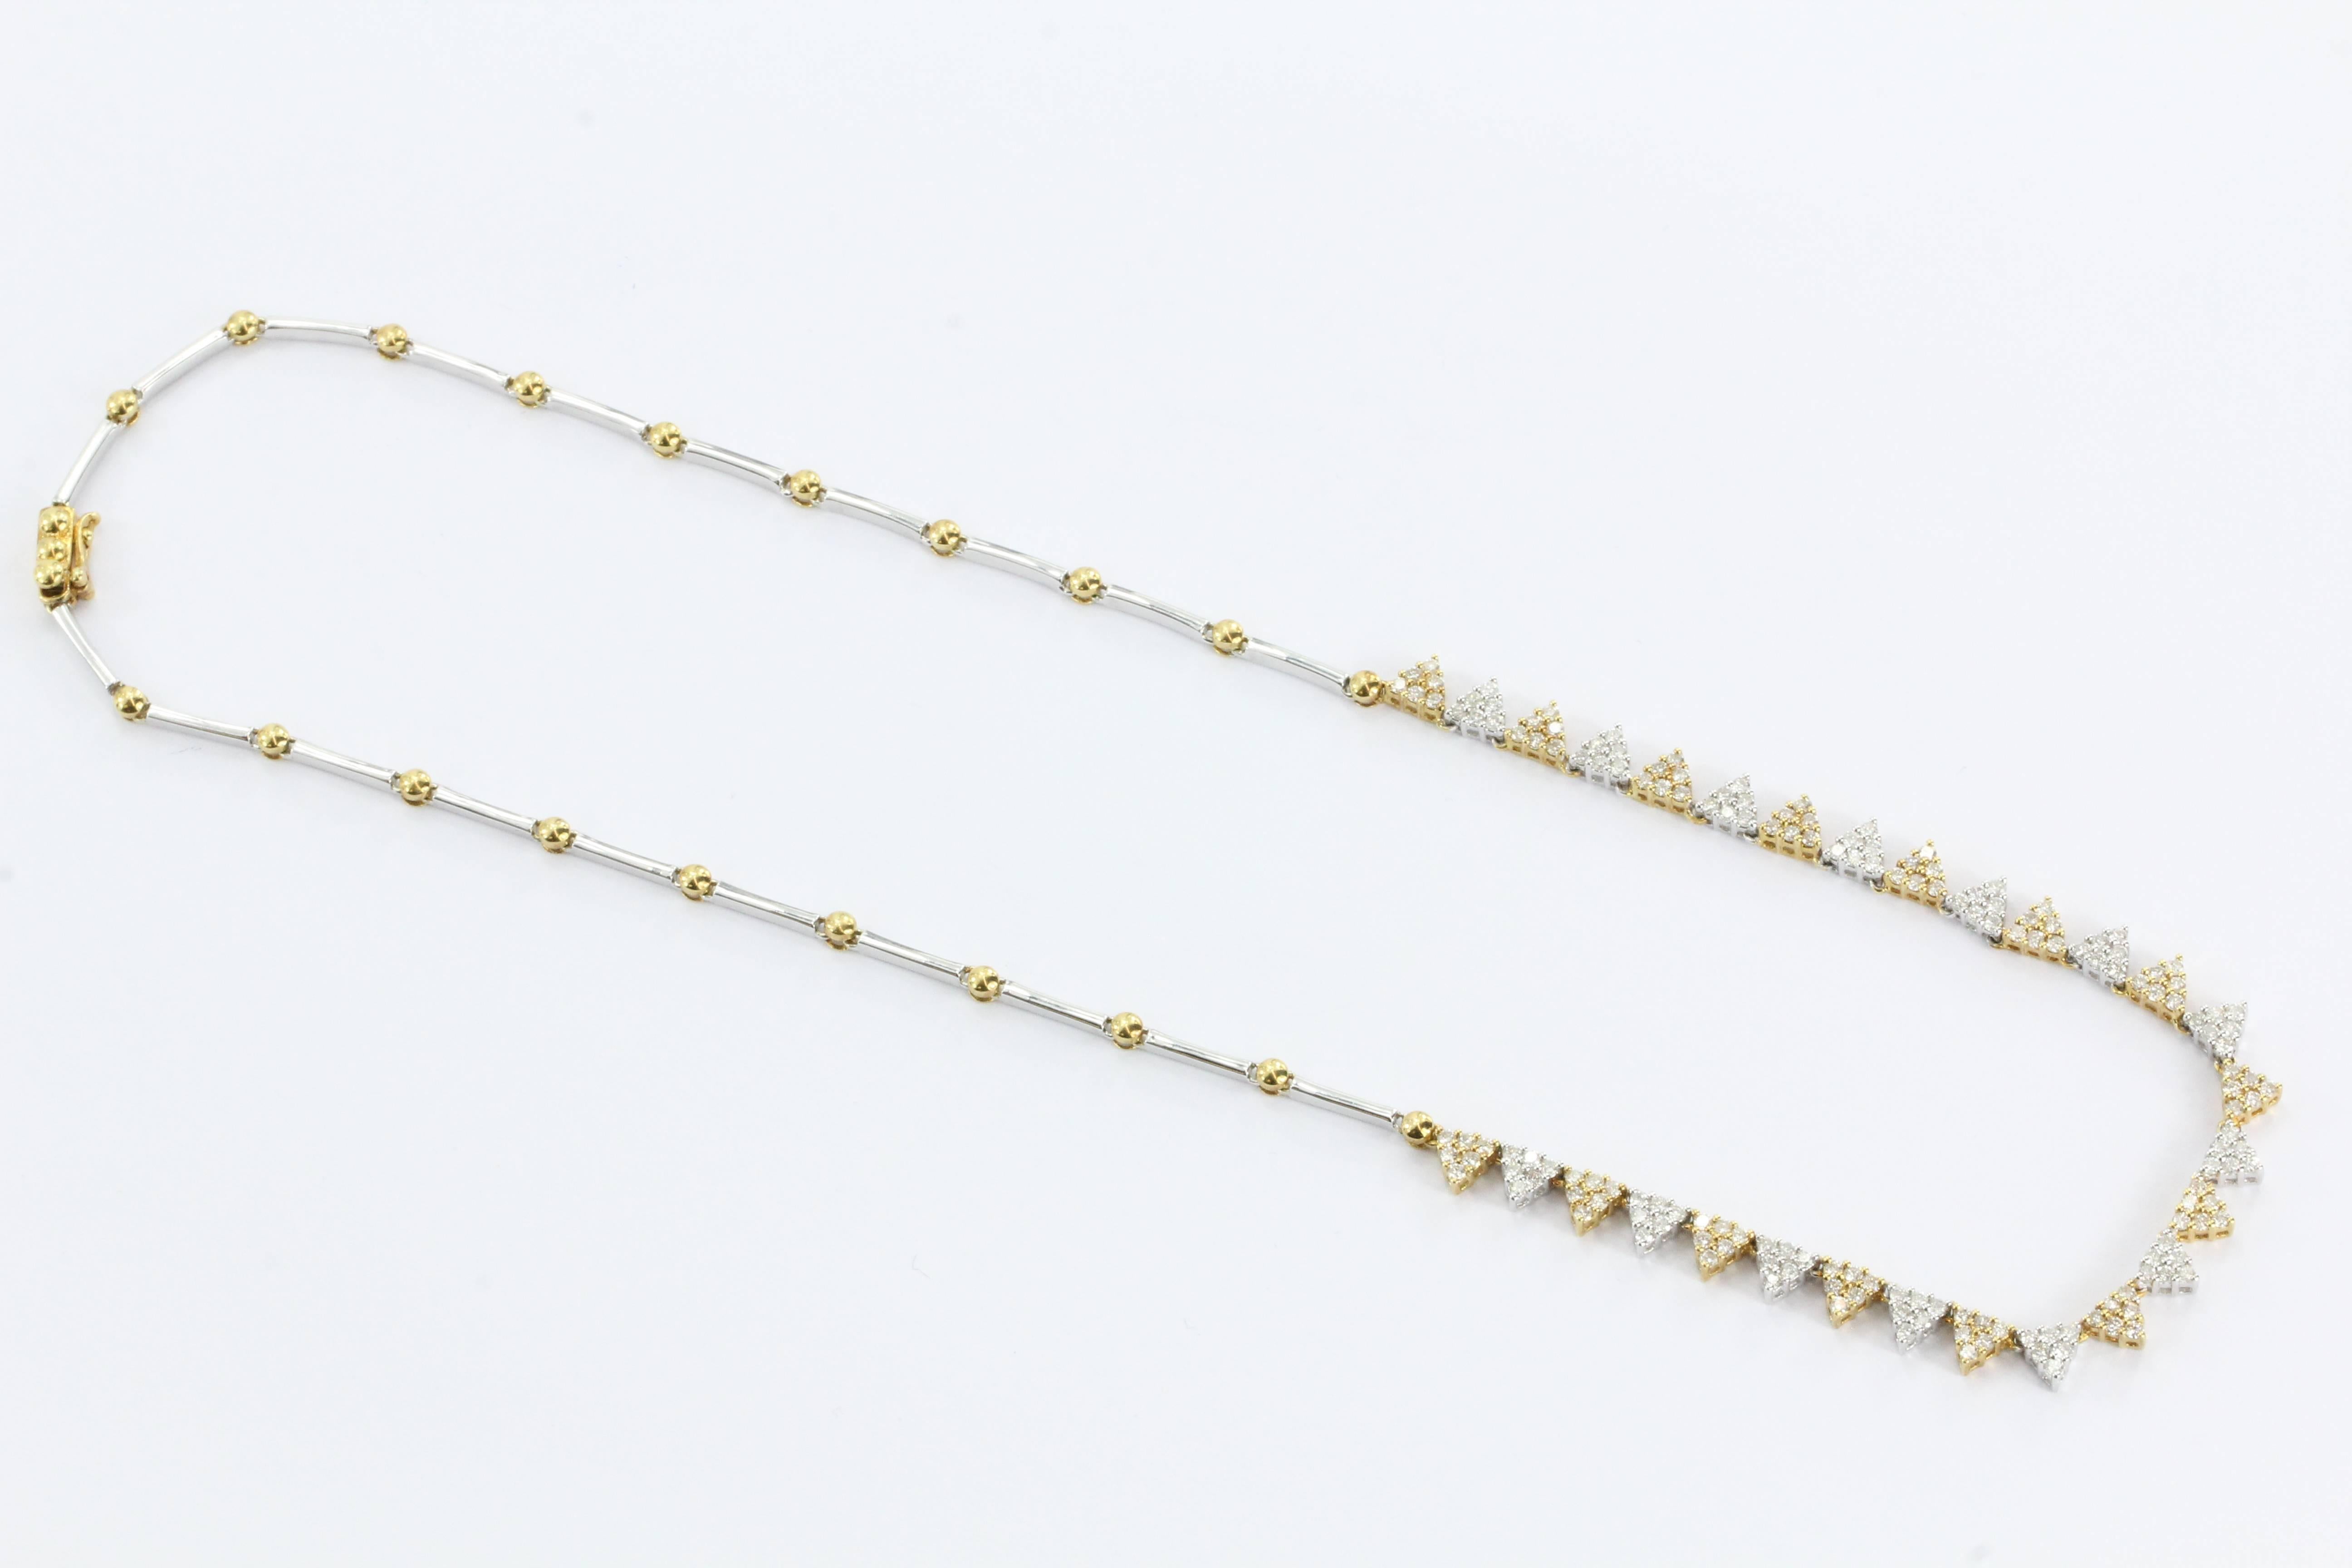 18K White & Yellow Gold Diamond Modernist Necklace. The necklace is in excellent estate condition, like new and ready to wear. It is hallmarked 750 twice and 18K on the clasp. There is no makers mark that I can find. It is made of alternating white